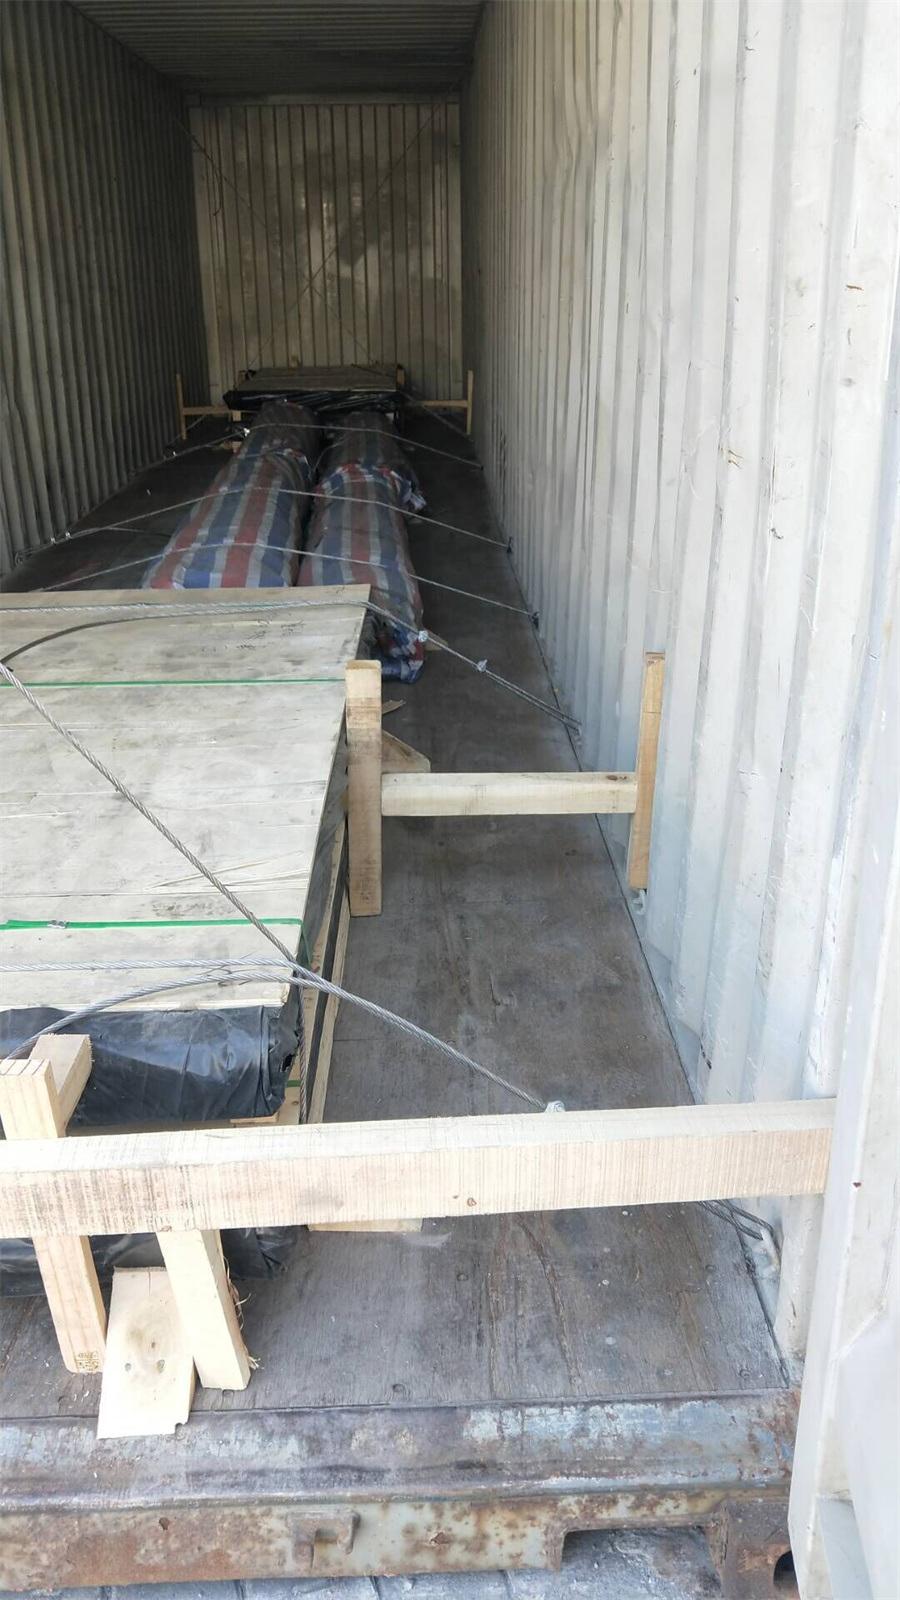 200tons Cheap Mild Steel I Beam for Construction